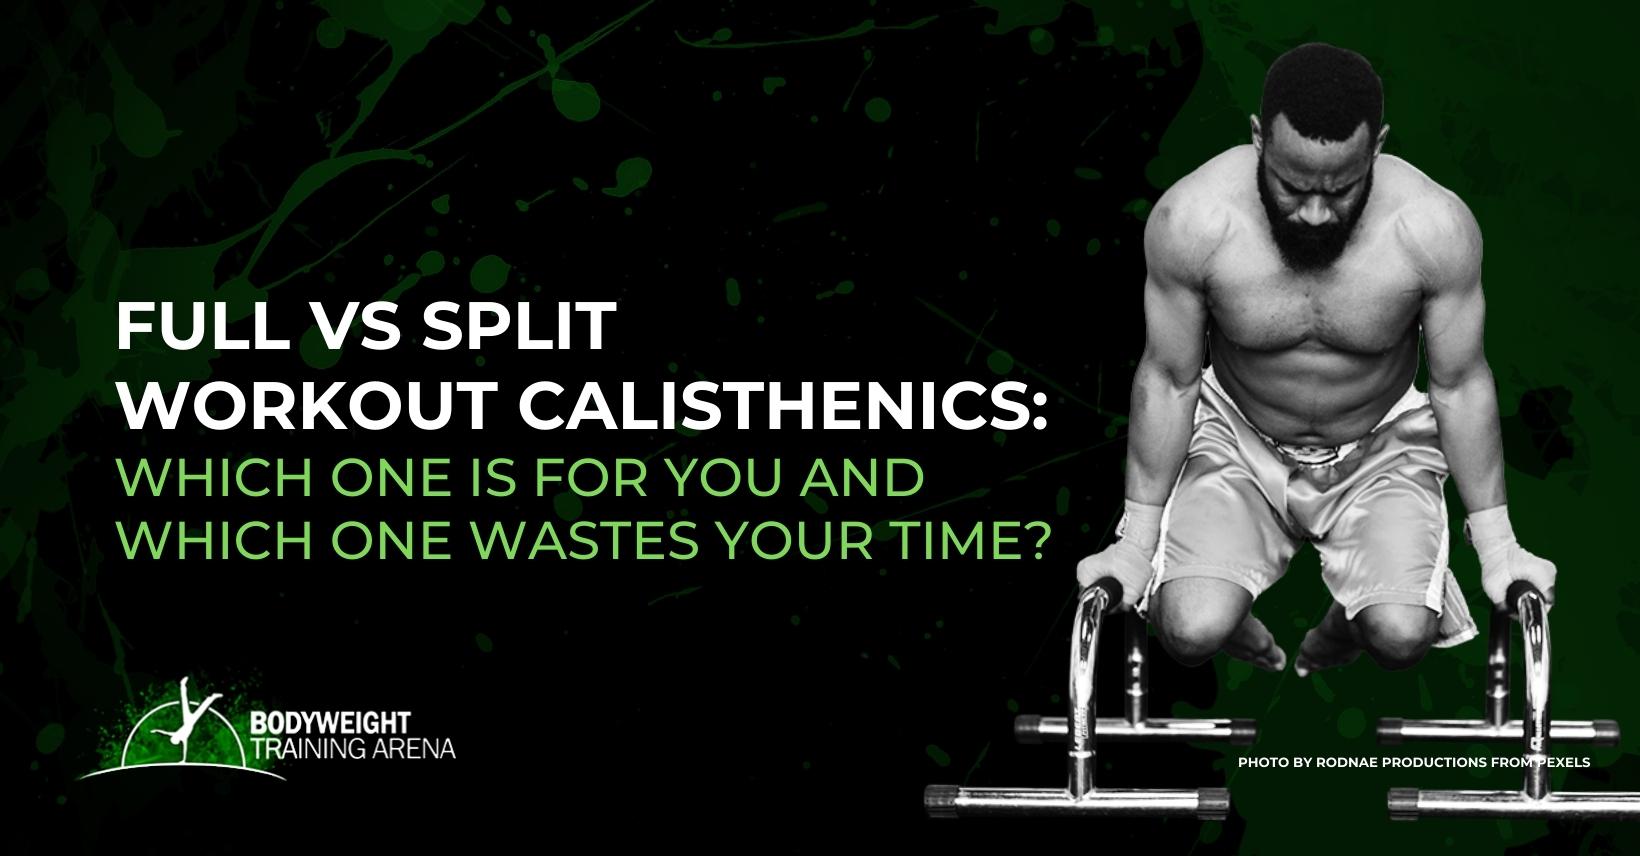 Full vs split workout calisthenics: Which one is for you and which one wastes your time?